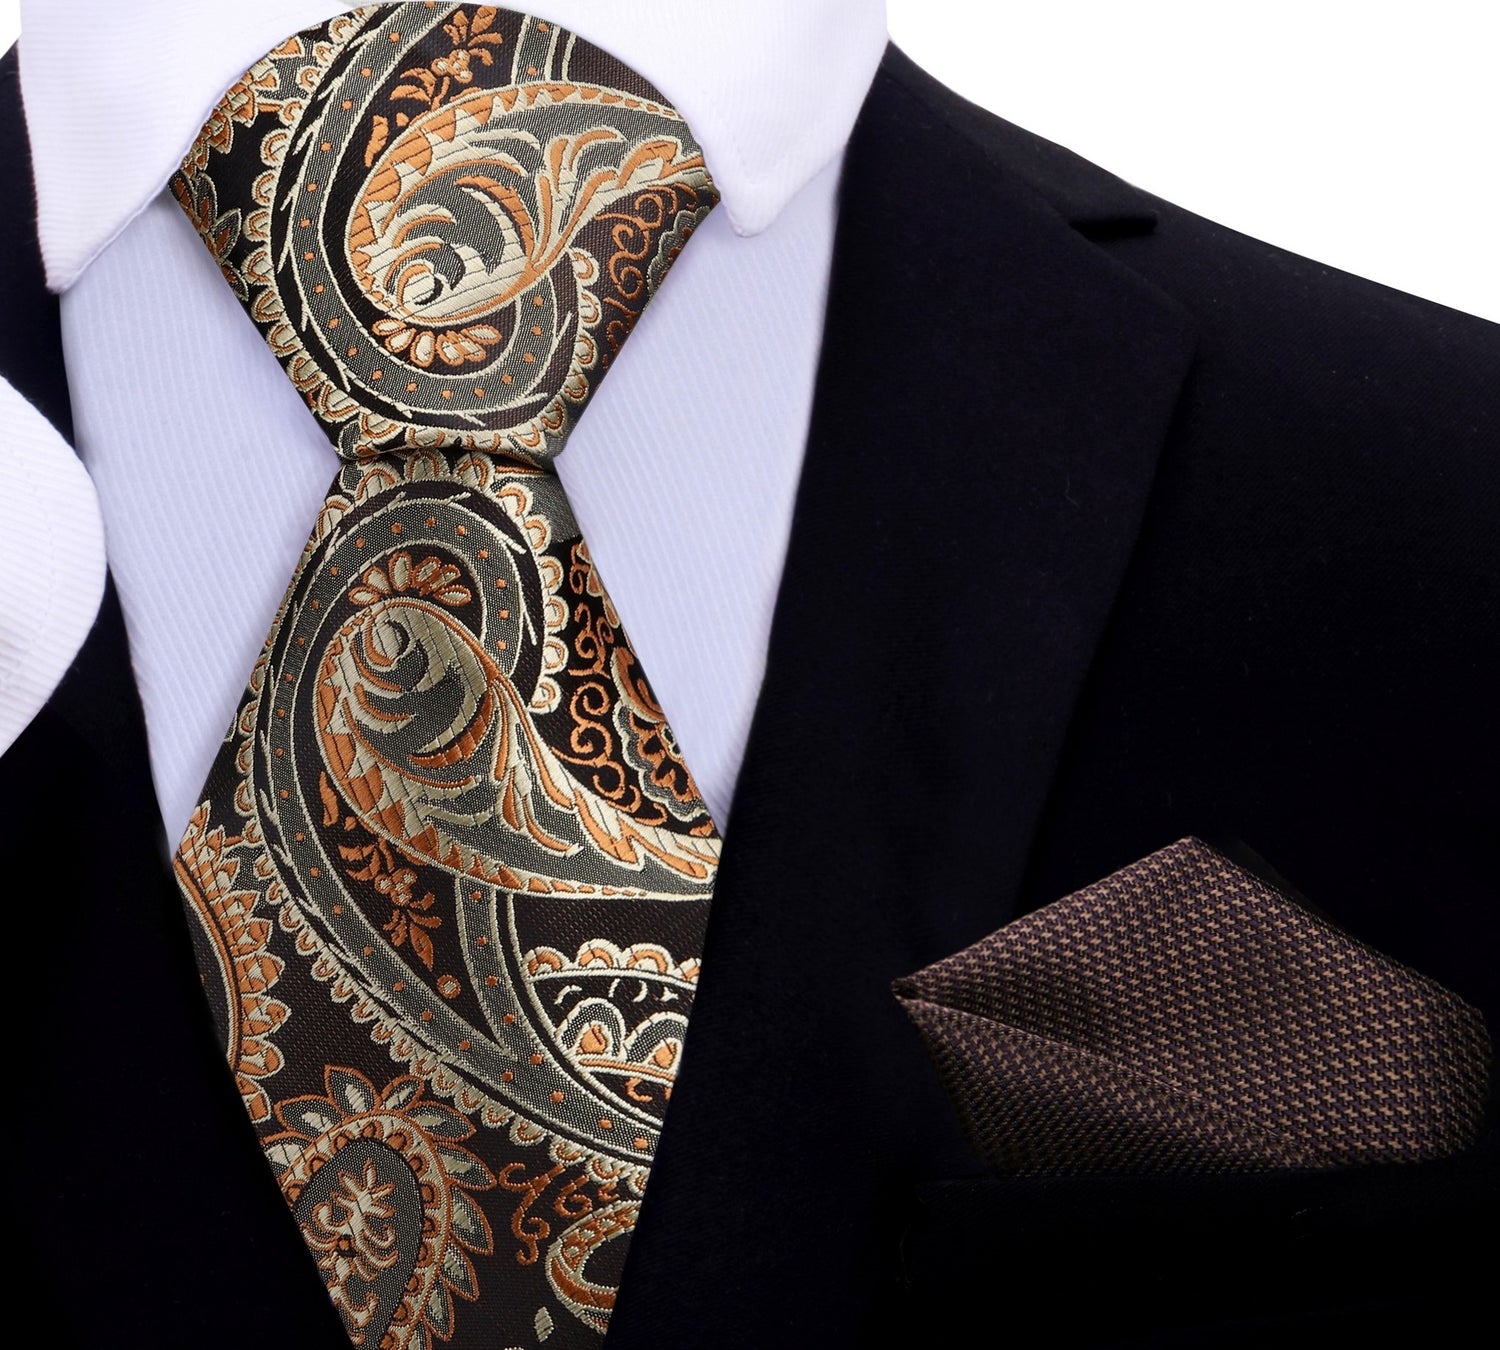 Shades of Brown Paisley Tie and Brown Houndstooth Pocket Square